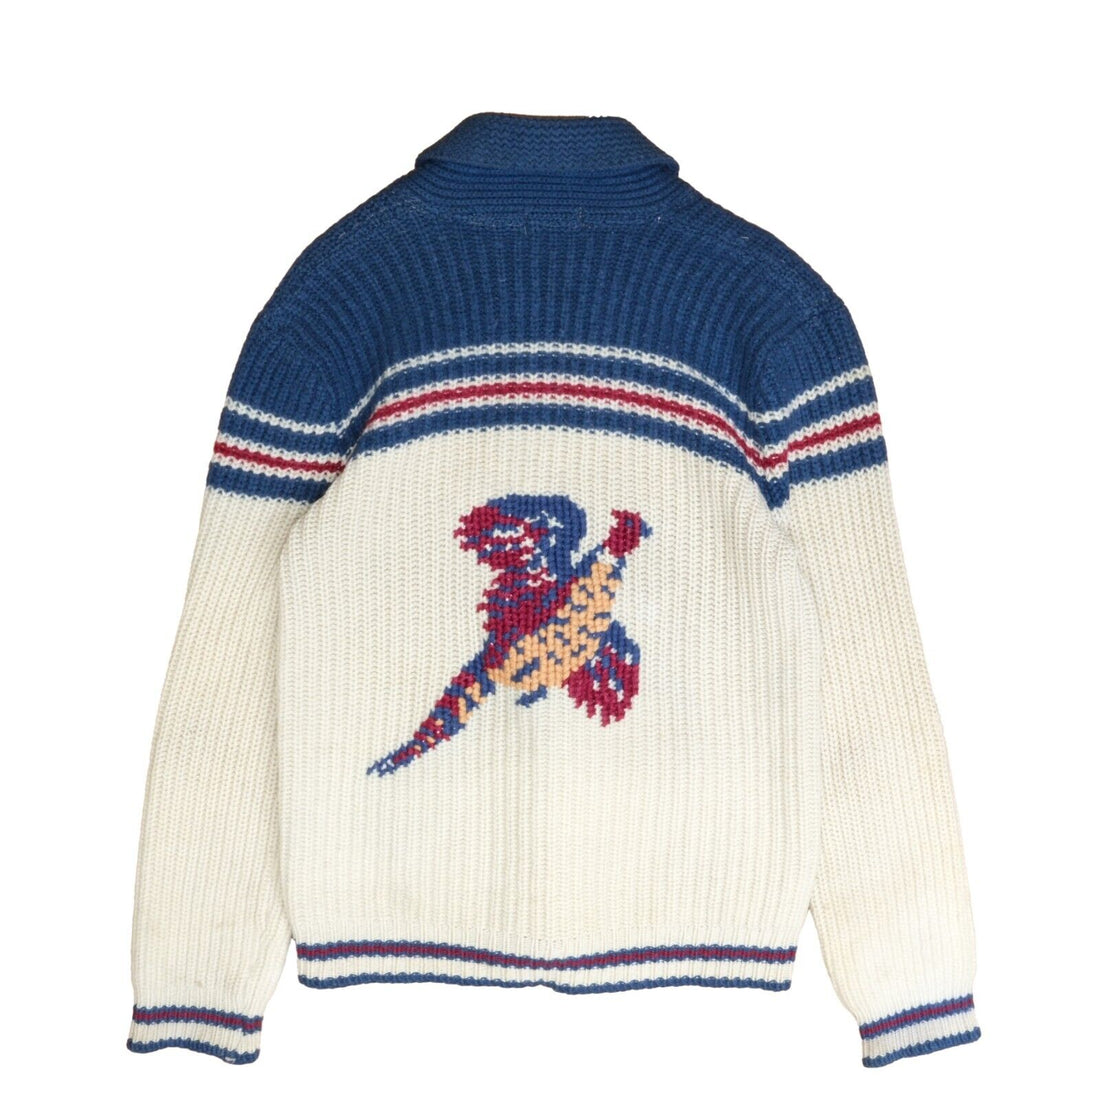 Vintage Pheasant Botany Wool Knit Cowichan Sweater Size Small